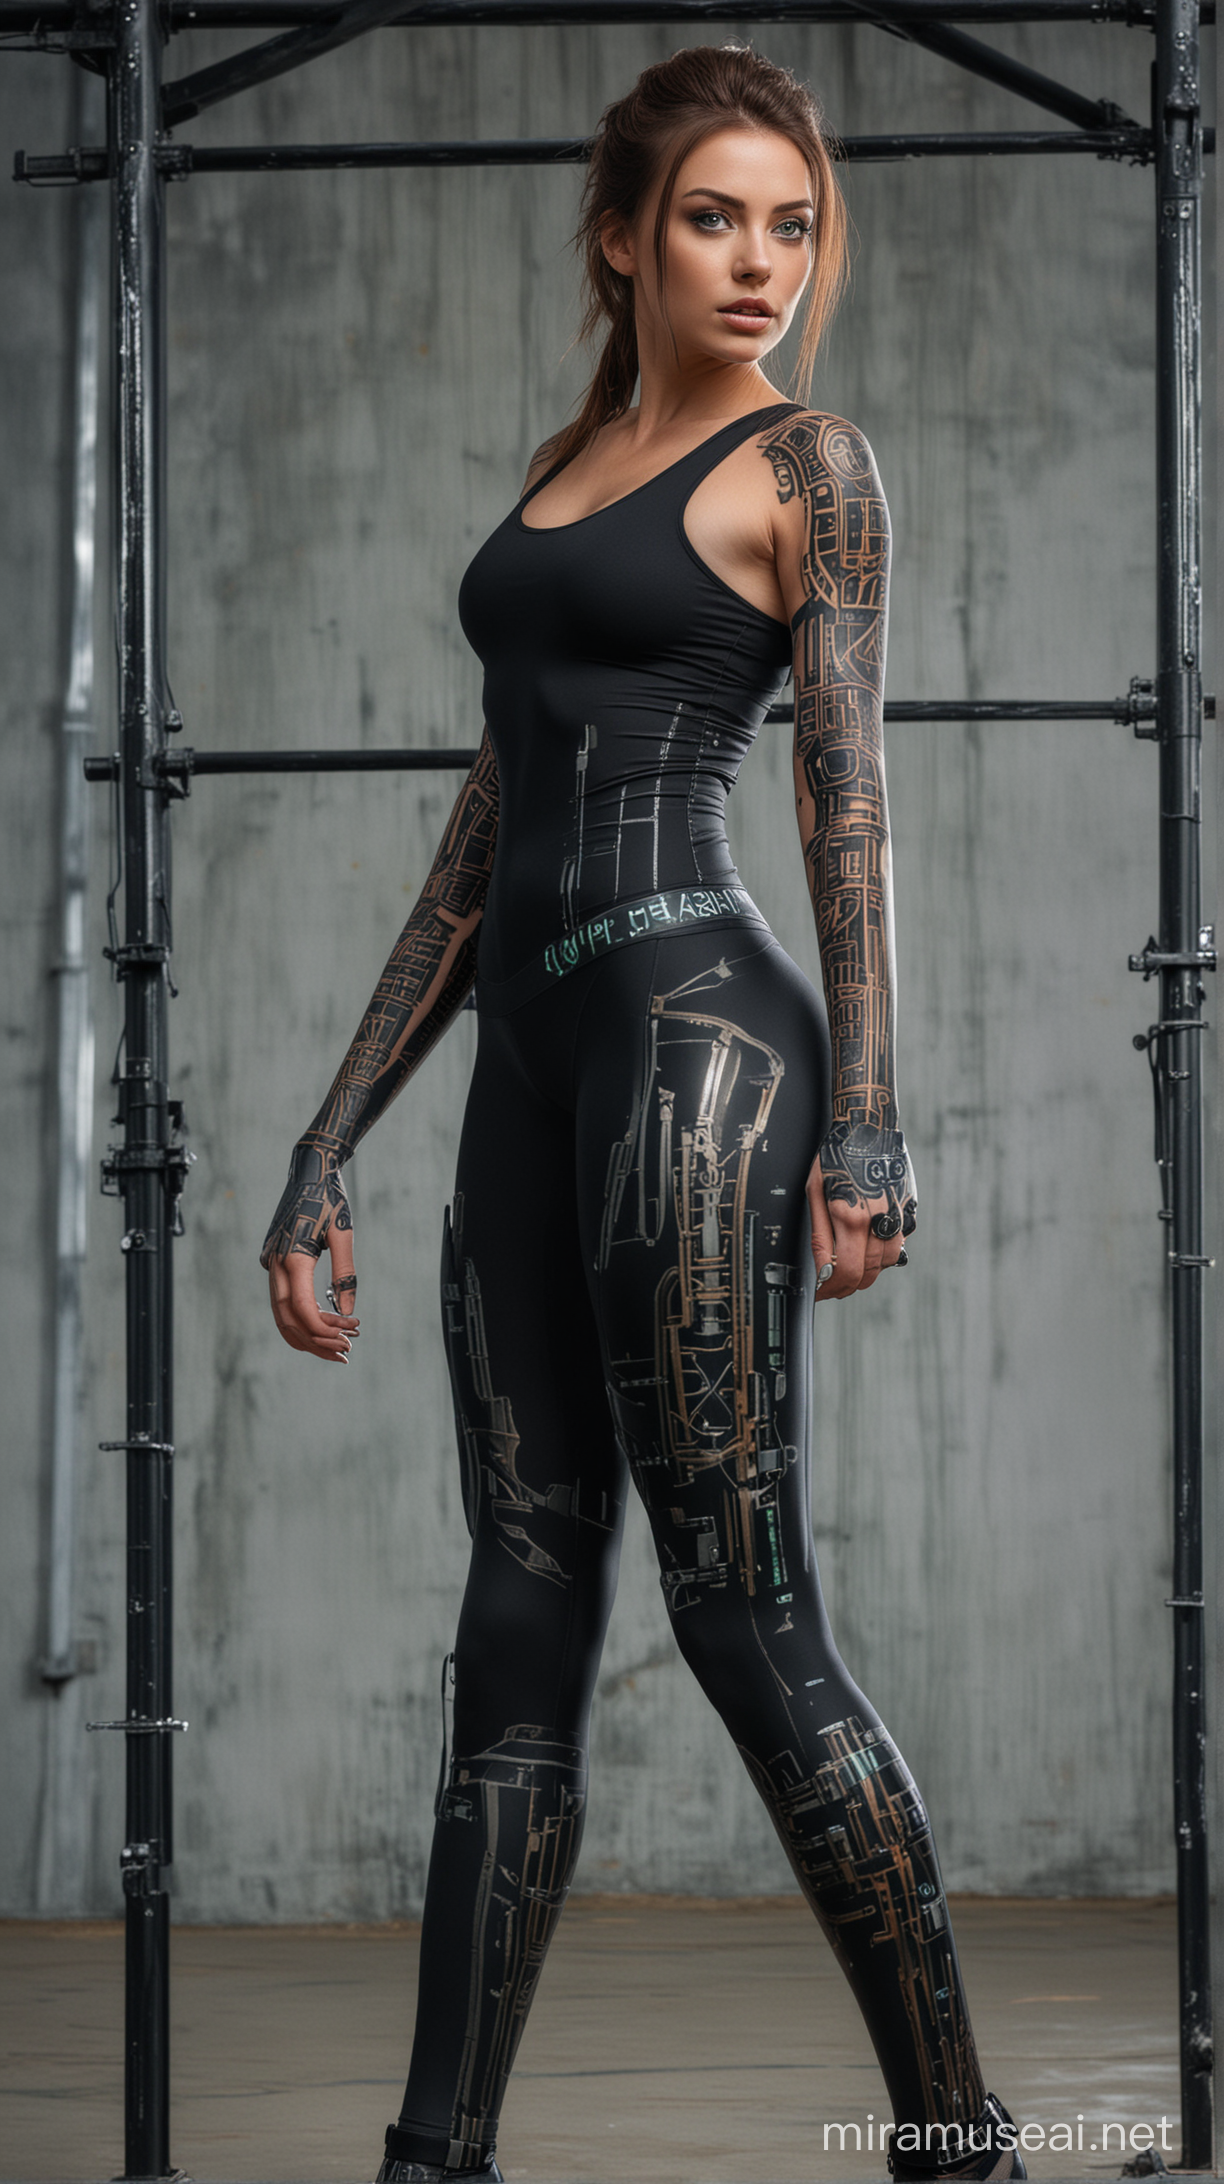 Beautiful woman with brown hair and striking green eyes, she is a cyborg but with only small amounts of metal coming through her skin on her face and body, she is wearing all black tights, she is standing in a dystopian world, she has a tattoo of three parallel bars on her right arm